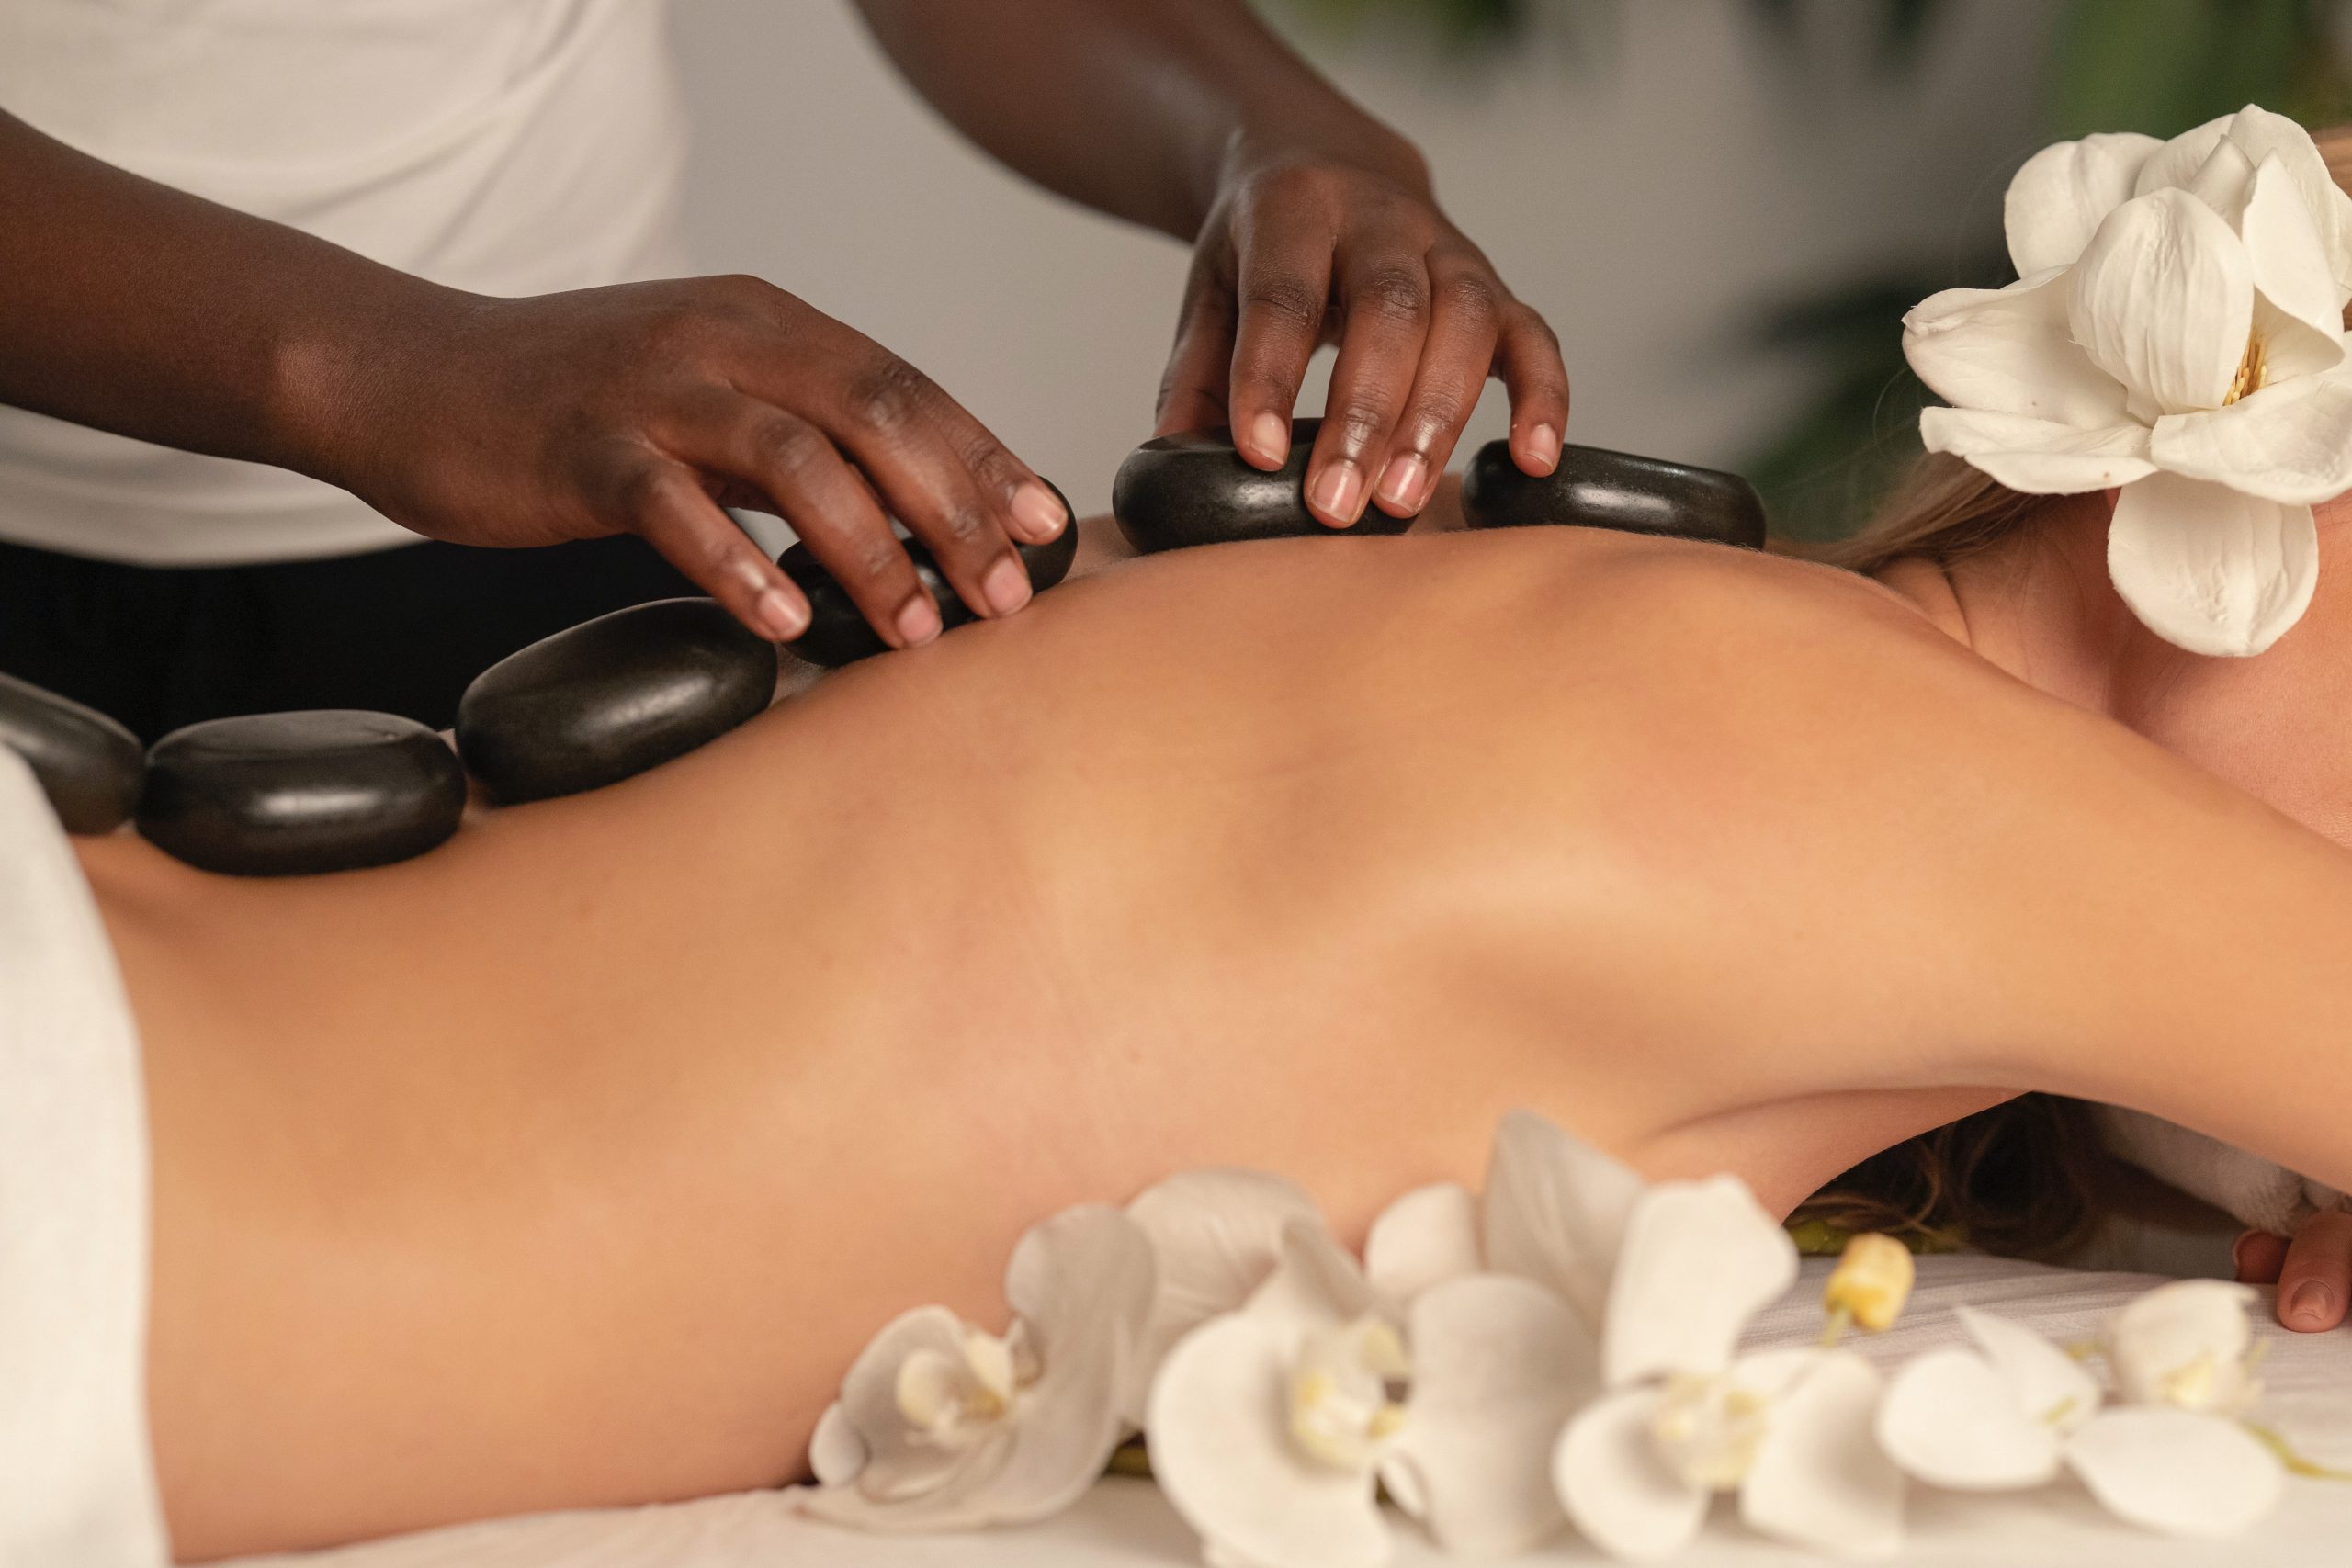 Hot Stone Massage: The Key to a Healthy and Balanced Lifestyle